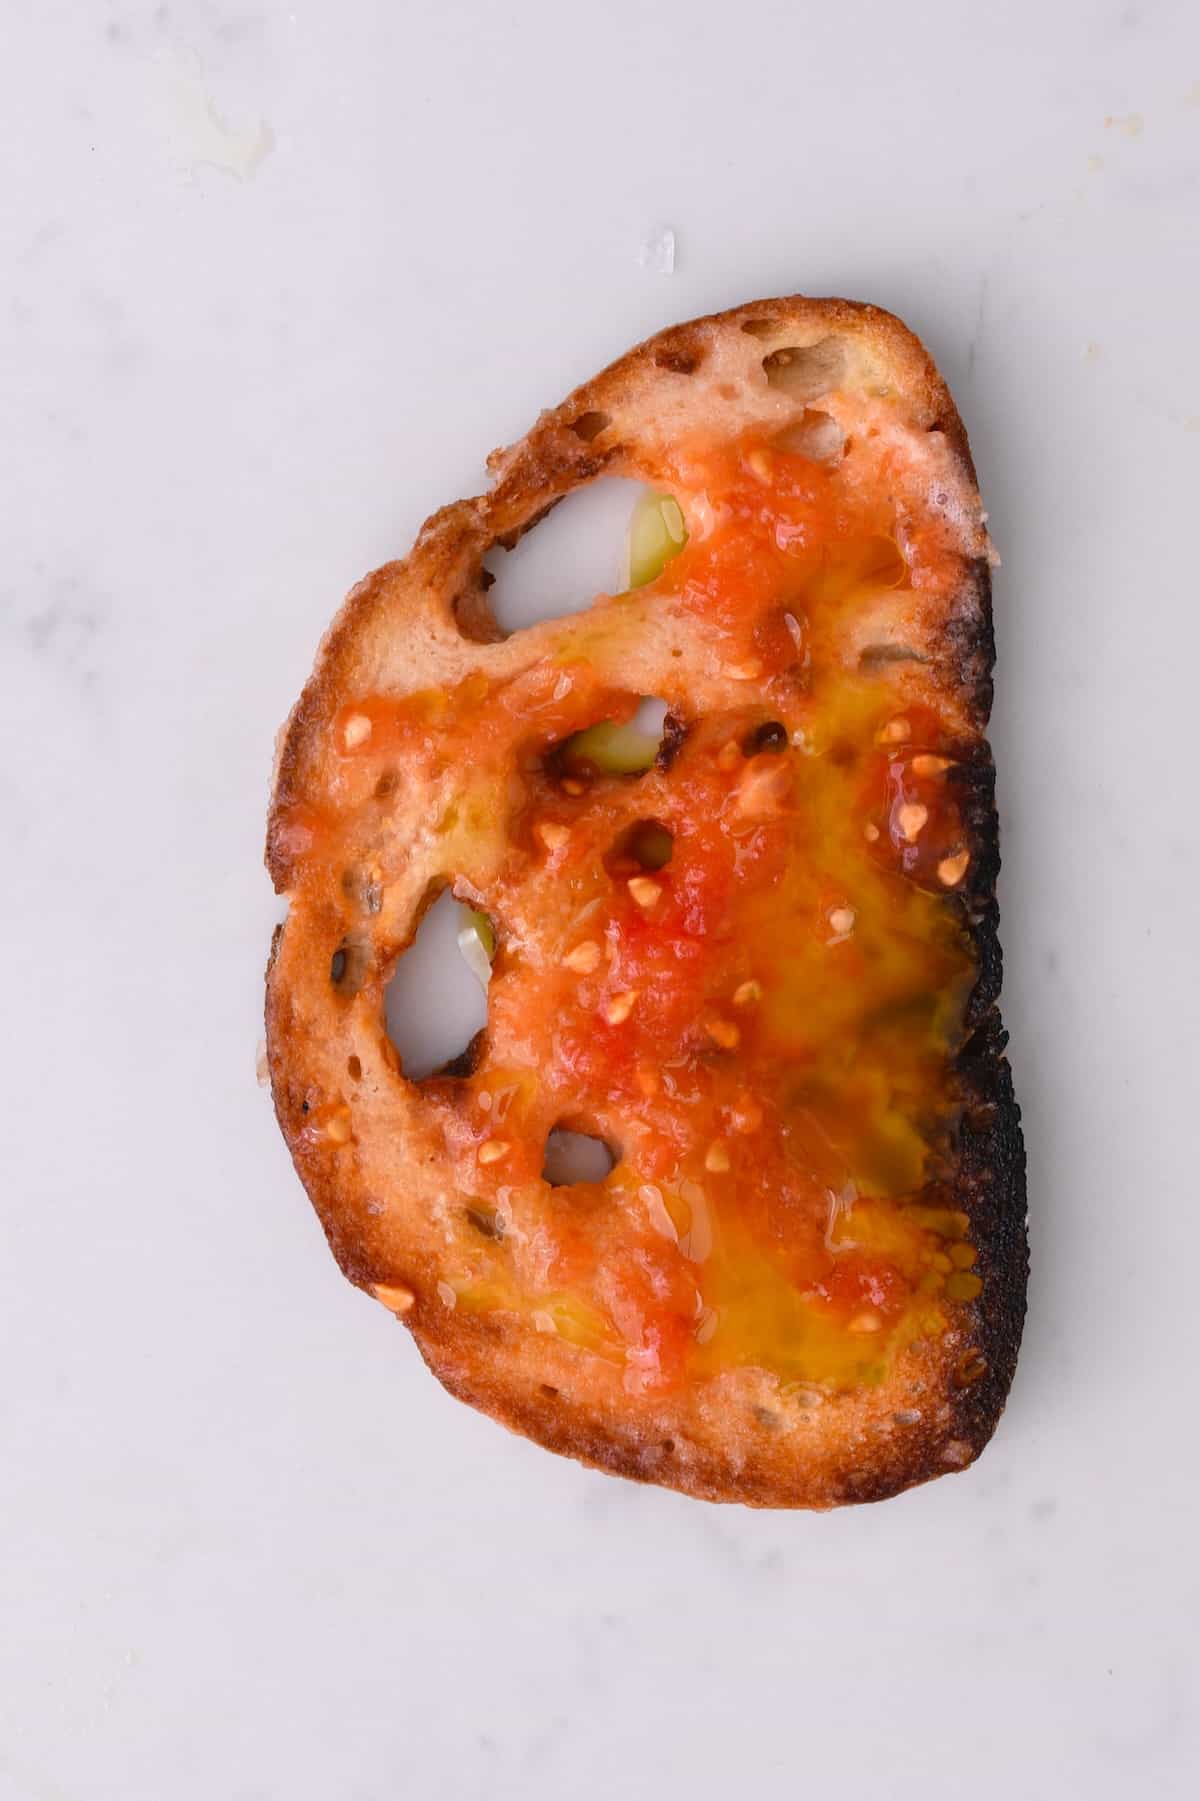 A slice of bread topped with tomato and olive oil